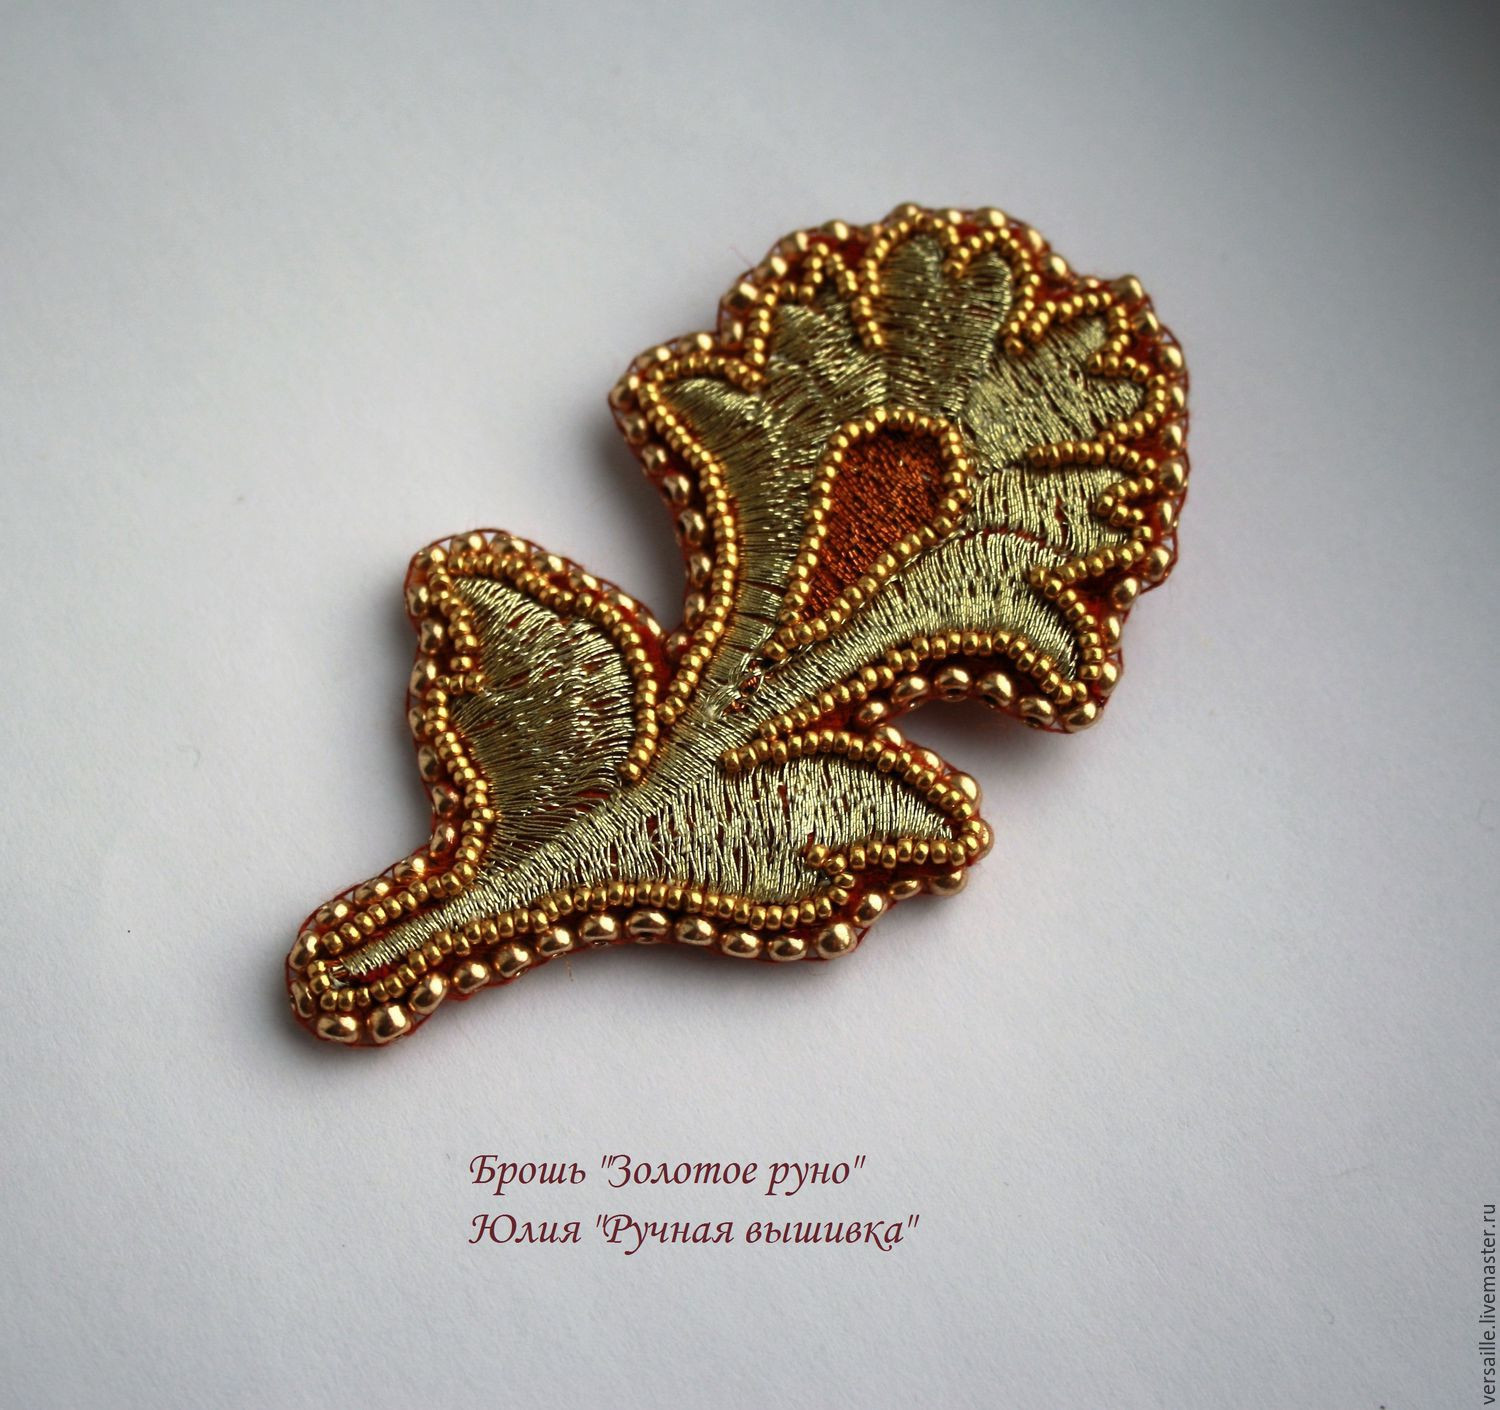 Brooches Embroidery
 Brooch with embroidery Brooch with beads "Golden fleece